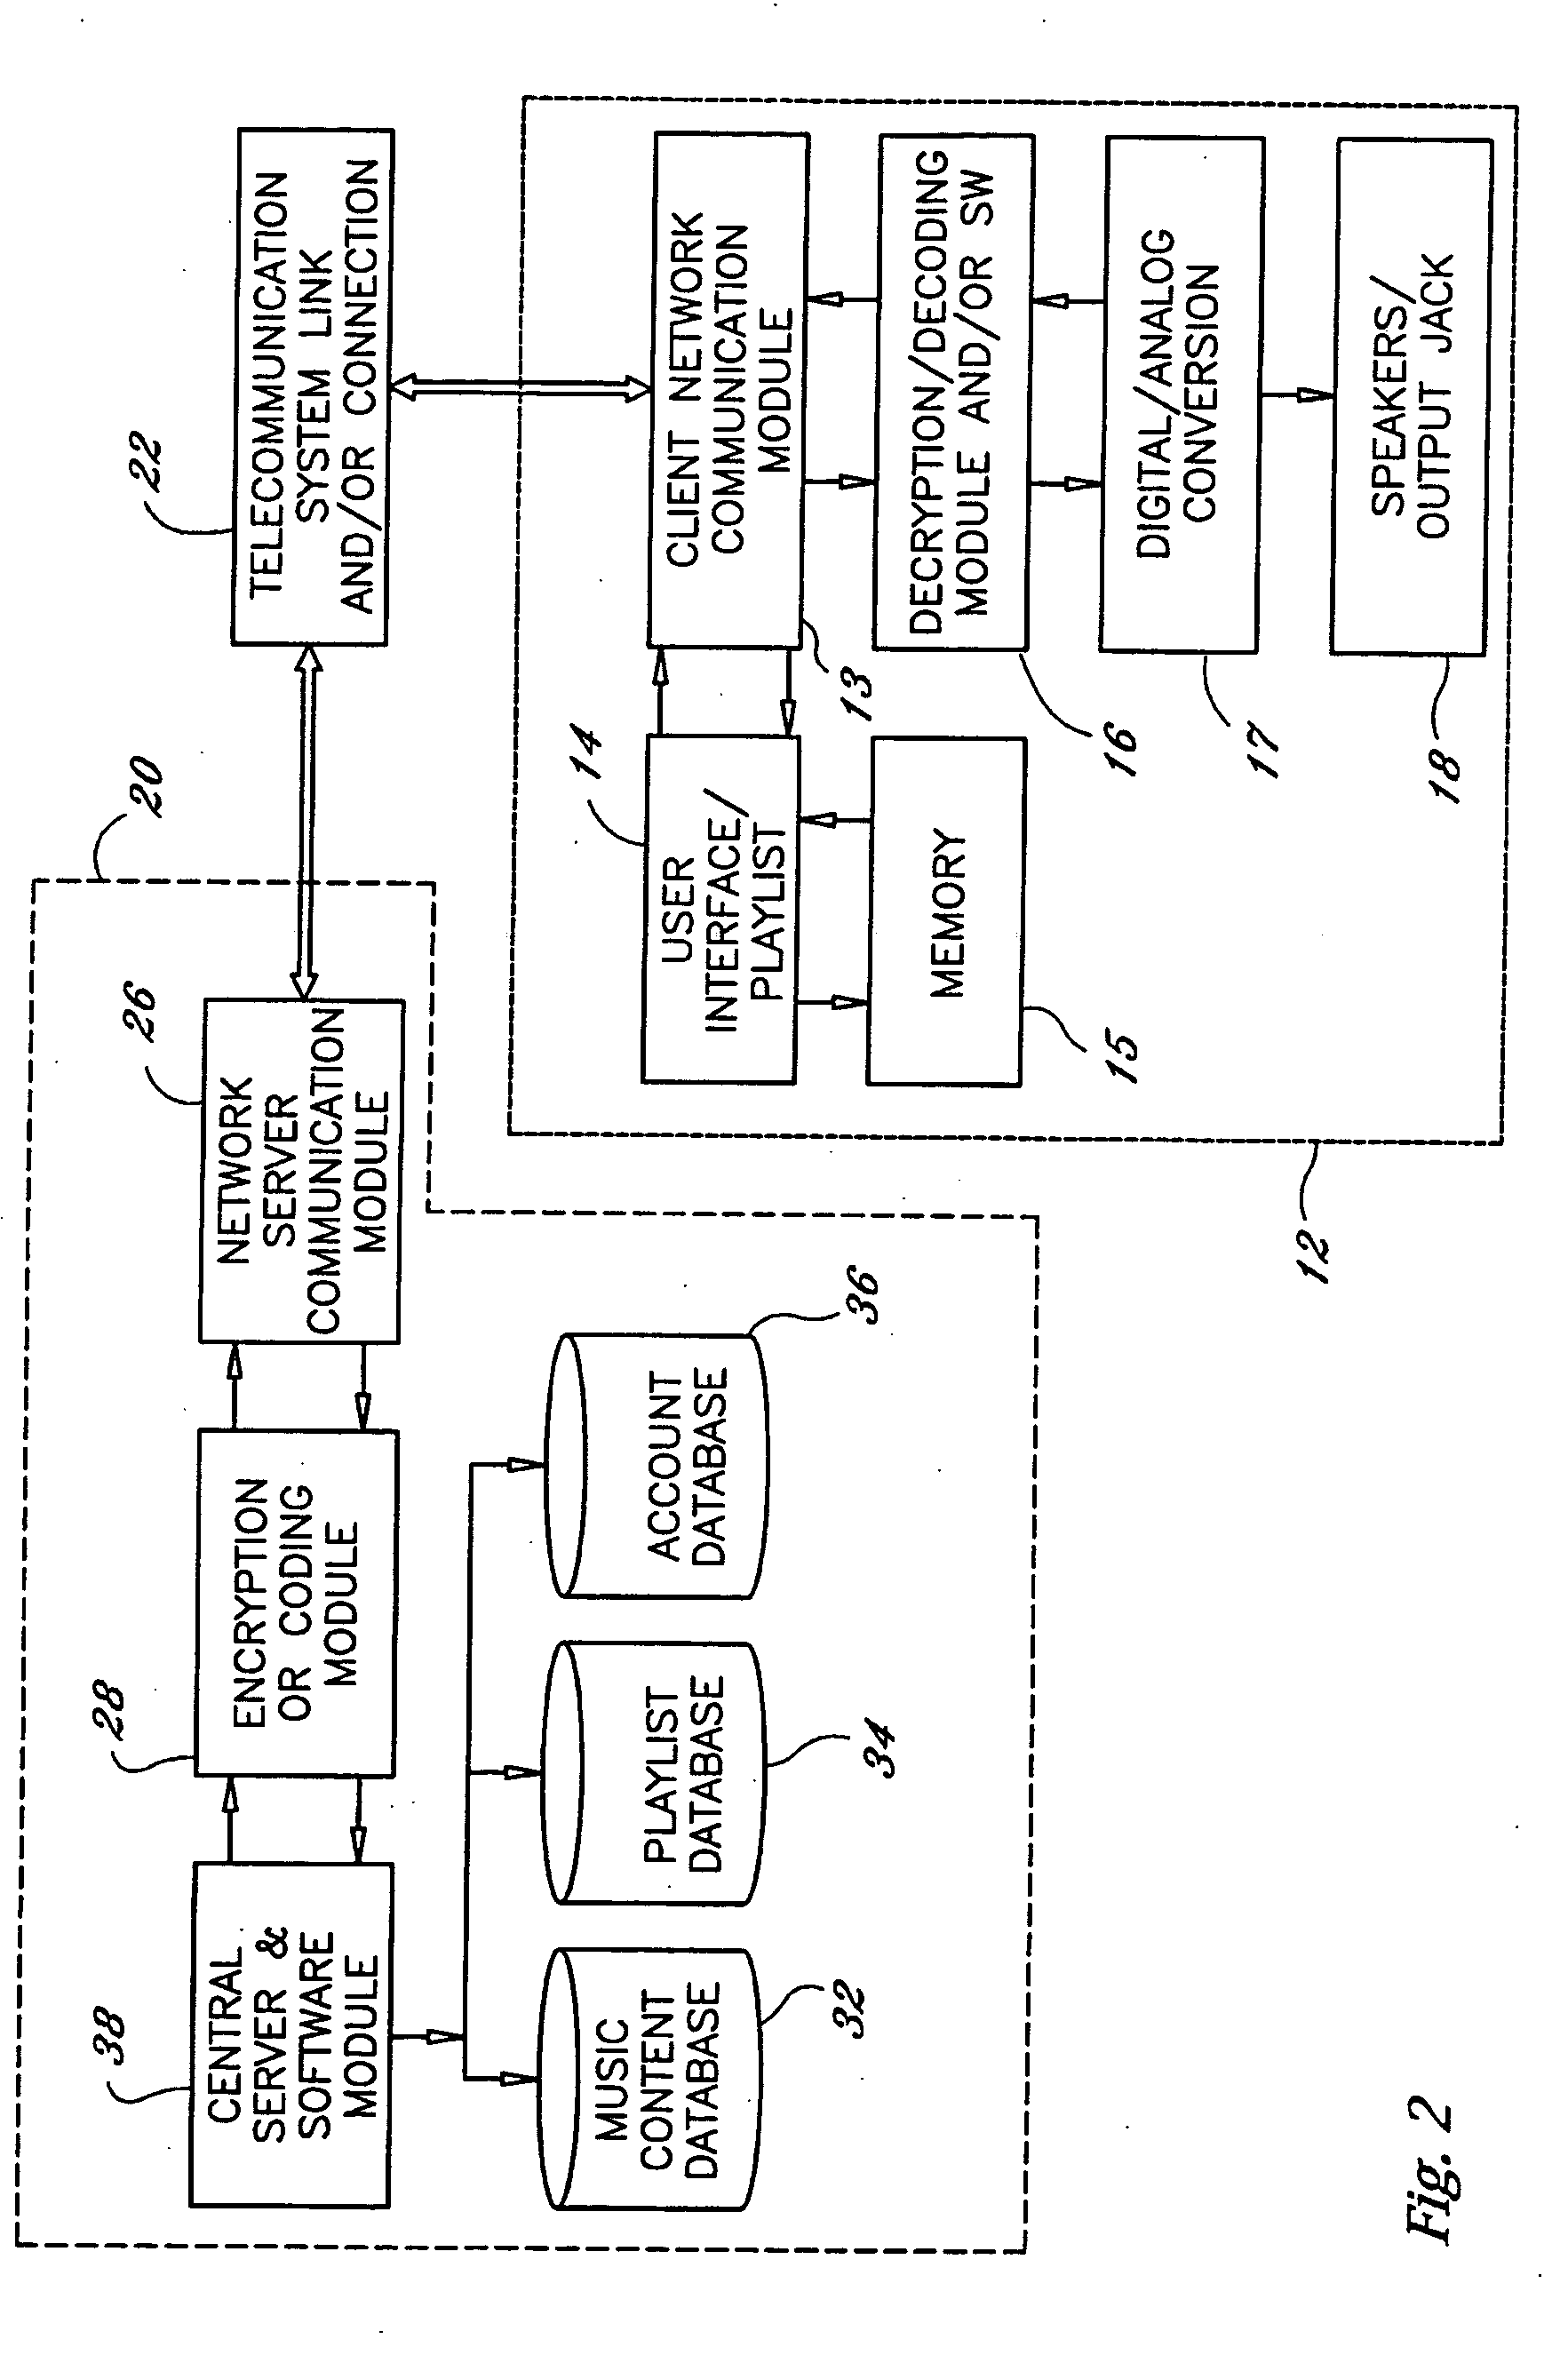 System, device and method for remotely providing, accessing and using personal entertainment media